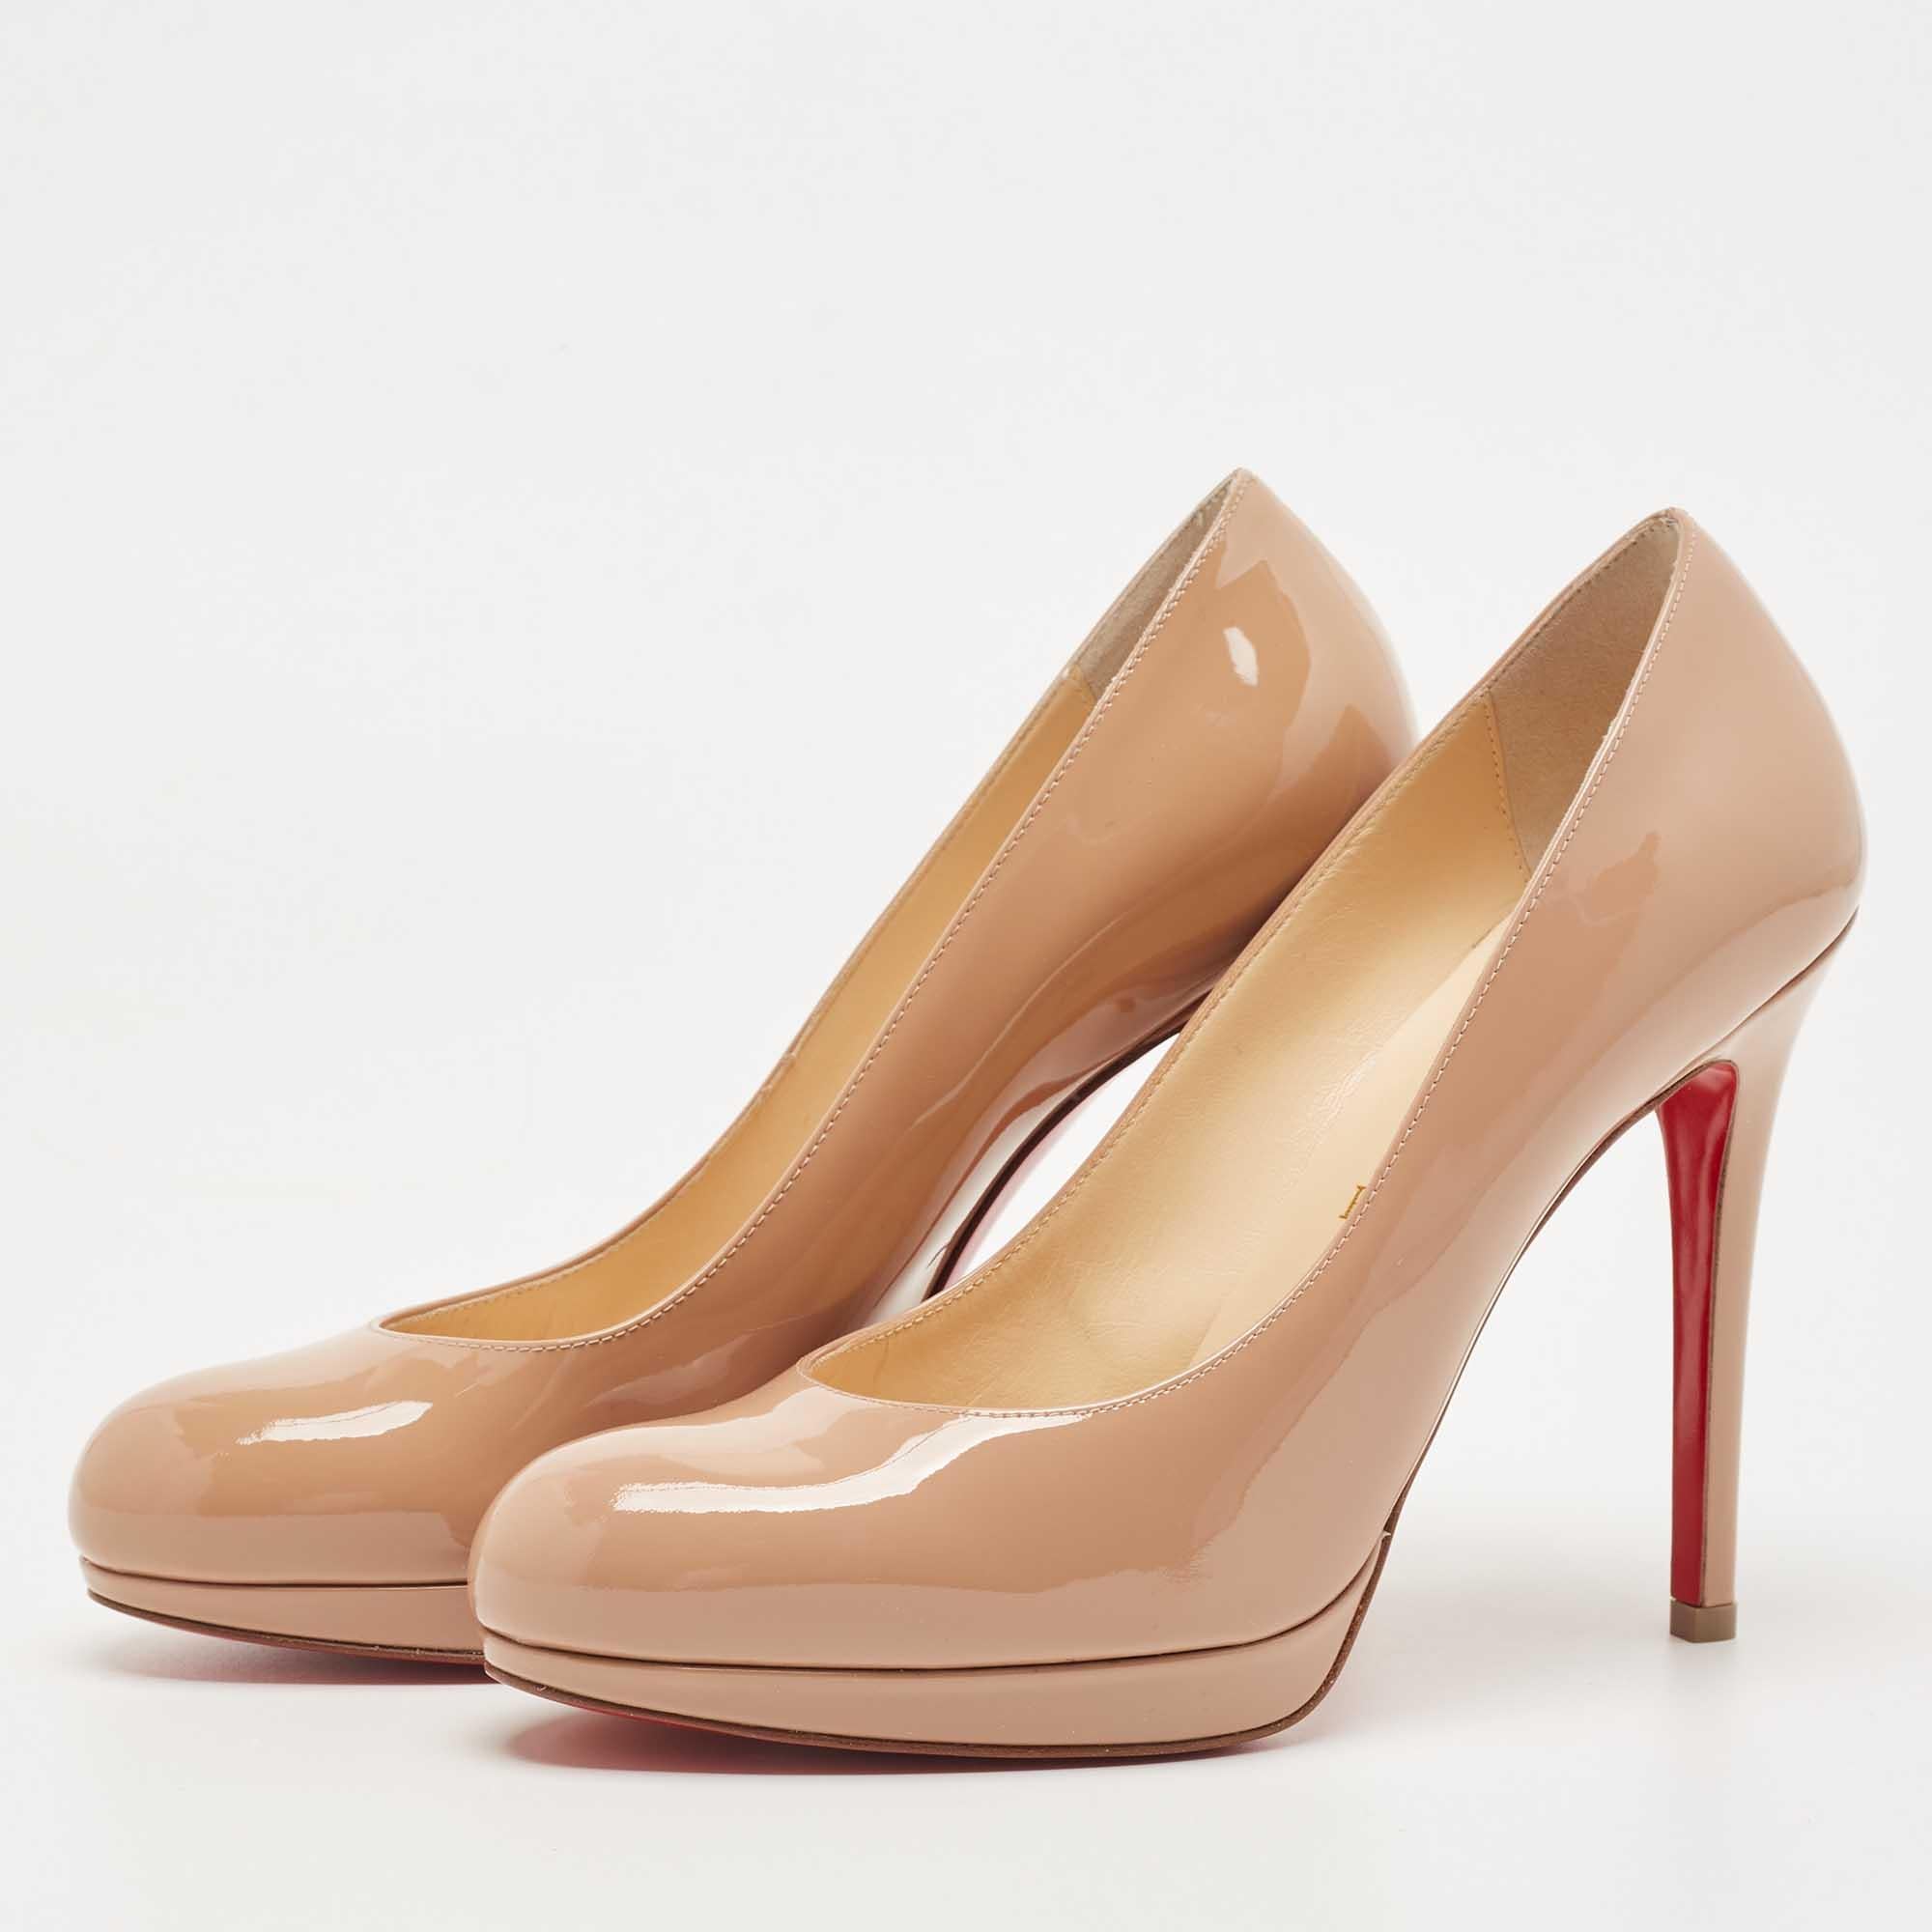 Exuding femininity and elegance, these pumps feature a chic silhouette with an attractive design. You can wear these Christian Louboutin pumps for a stylish look.

